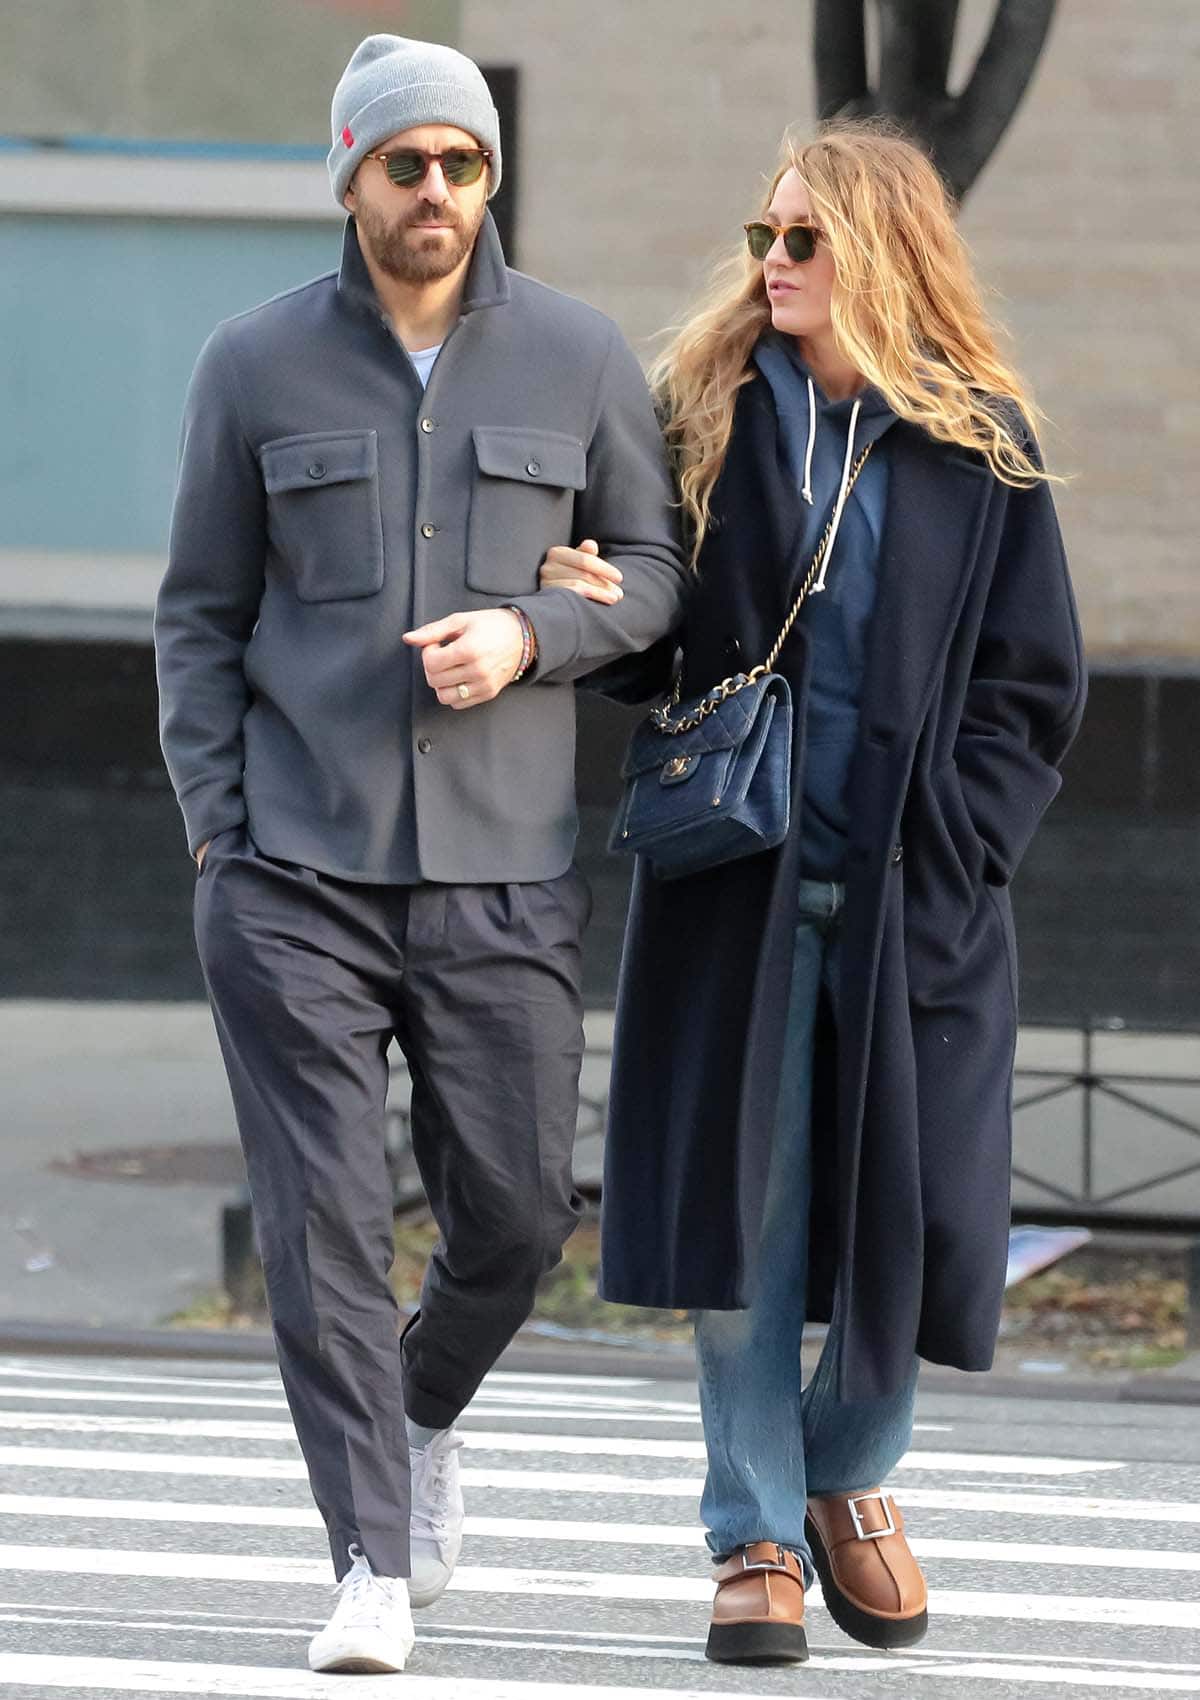 Blake Lively Bundles Up In Ugg X Opening Ceremony Clogs For Casual Stroll With Ryan Reynolds 